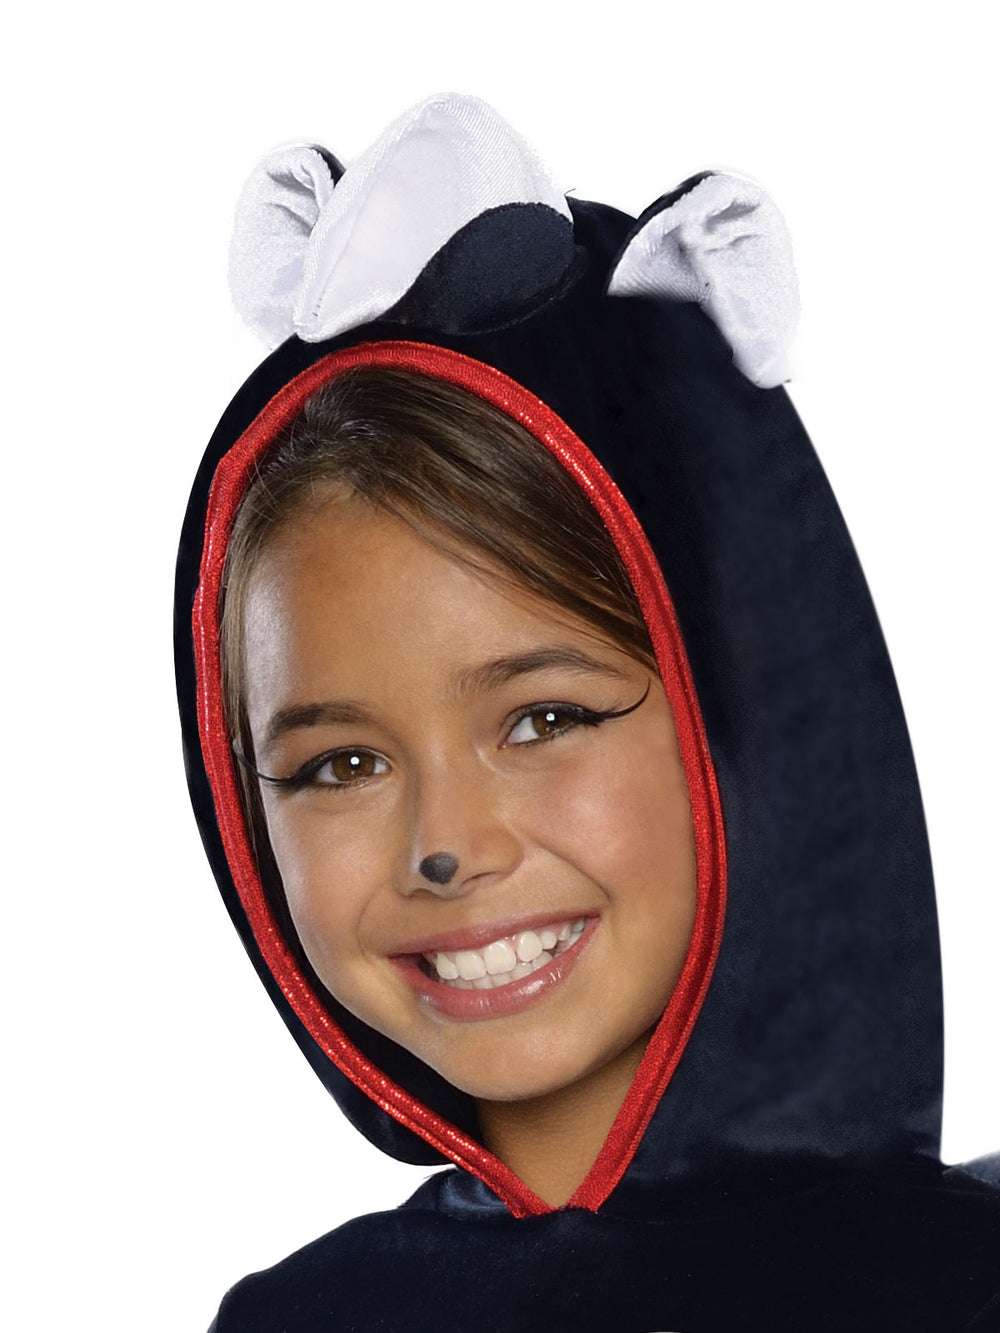 PEPE LE PEW HOODED COSTUME, CHILD - Little Shop of Horrors